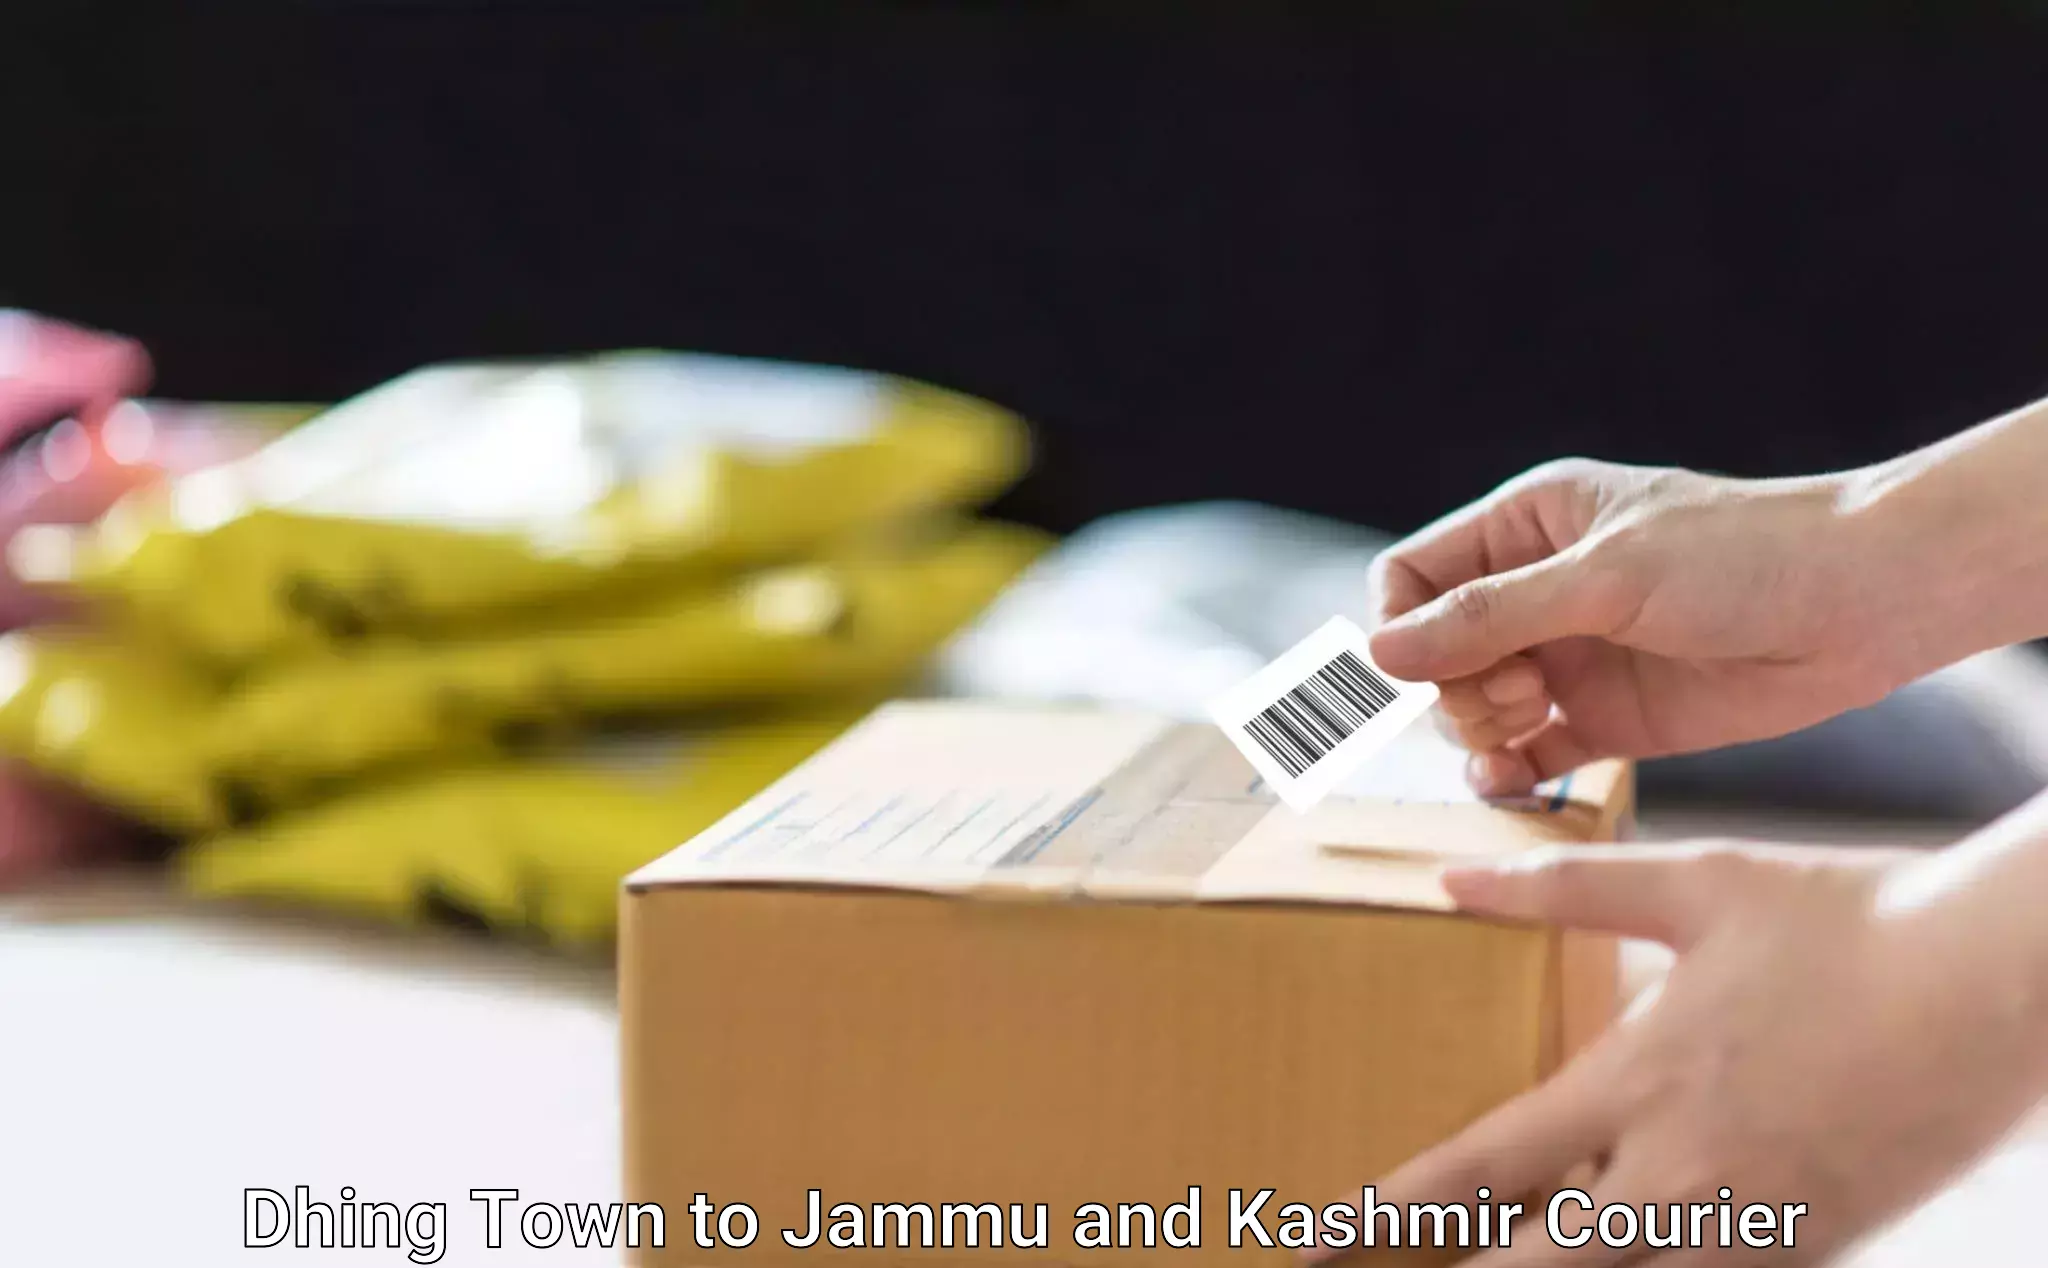 International parcel service Dhing Town to Jammu and Kashmir